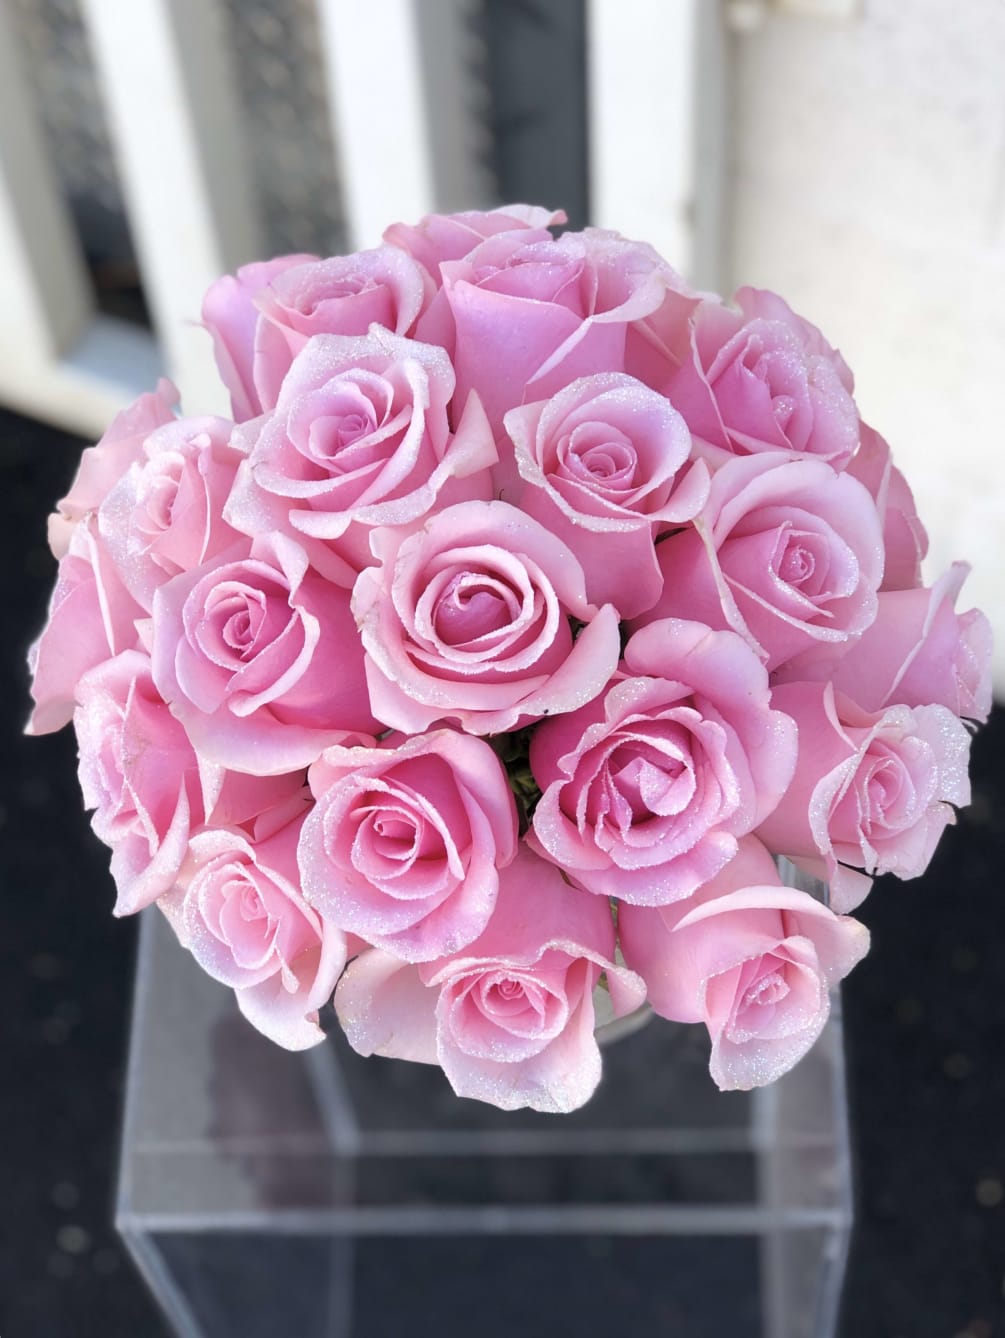 This pink glittered roses arrangement is a great way to add a